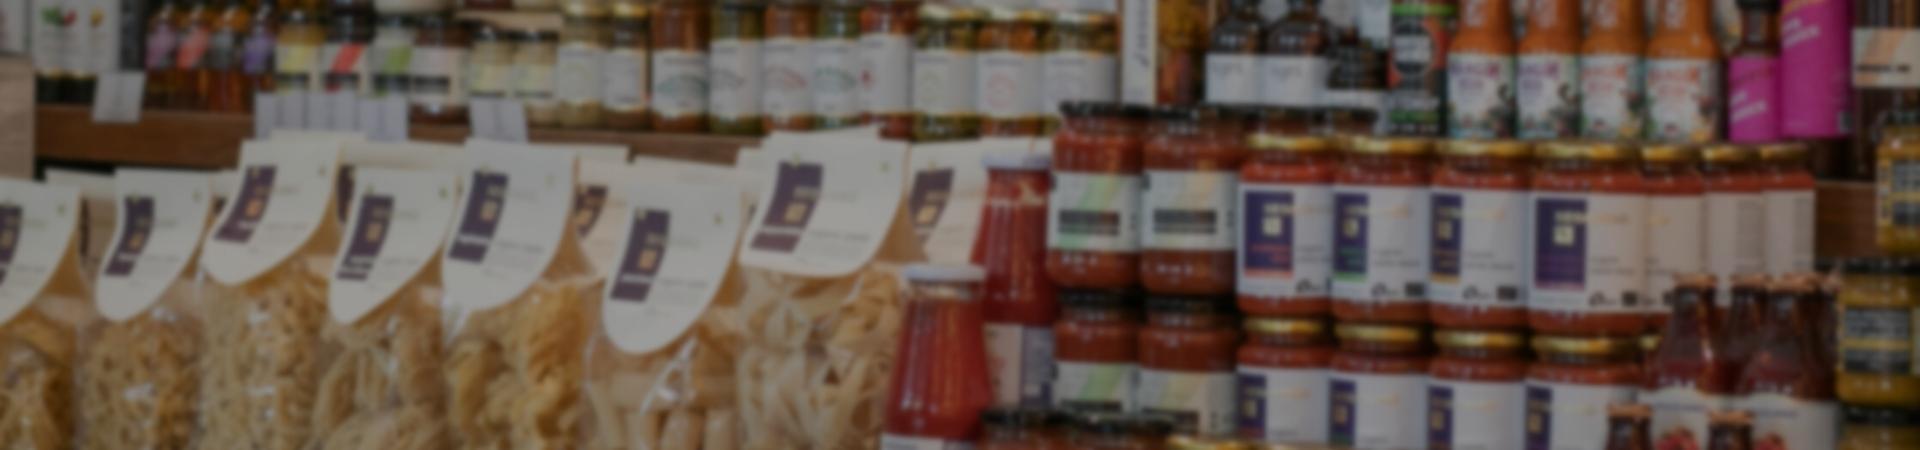 Rice, Pasta & Pasta Sauces - The Dempsey Project